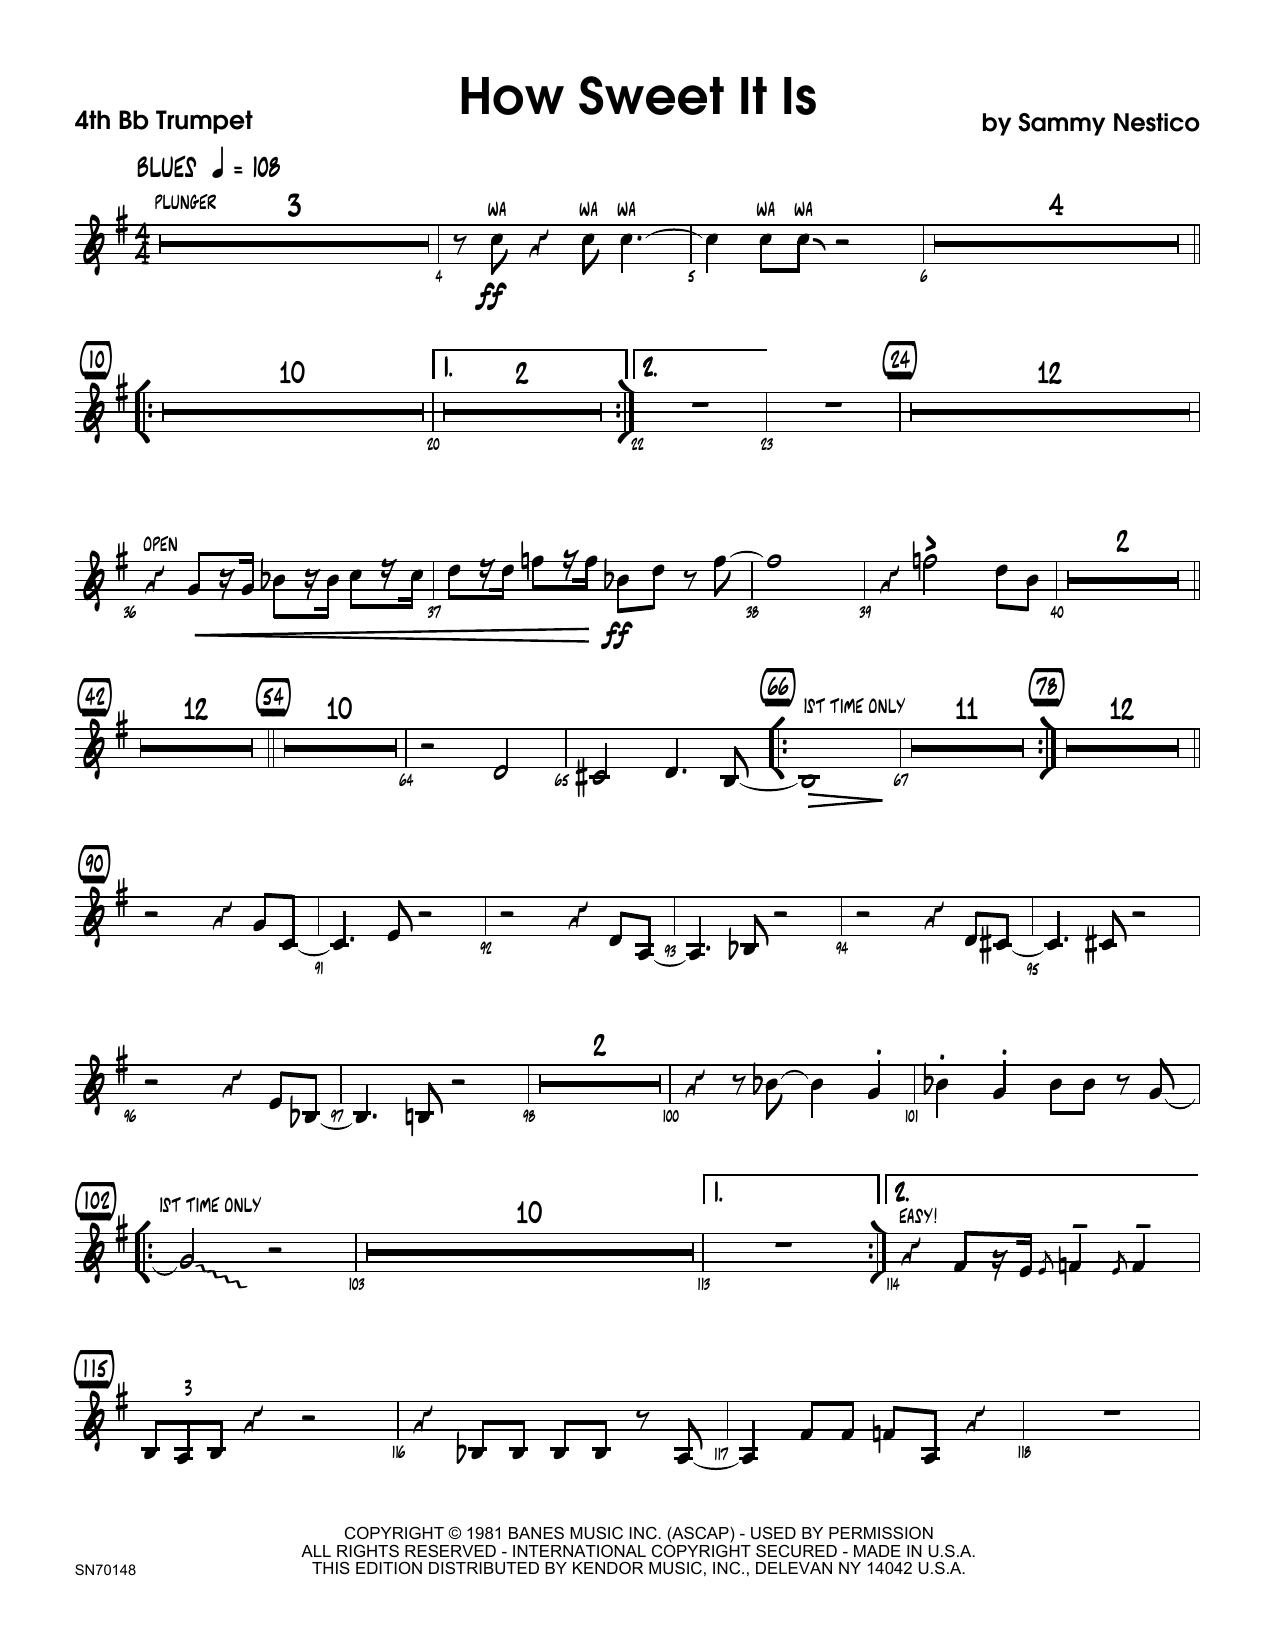 Download Sammy Nestico How Sweet It Is - 4th Bb Trumpet Sheet Music